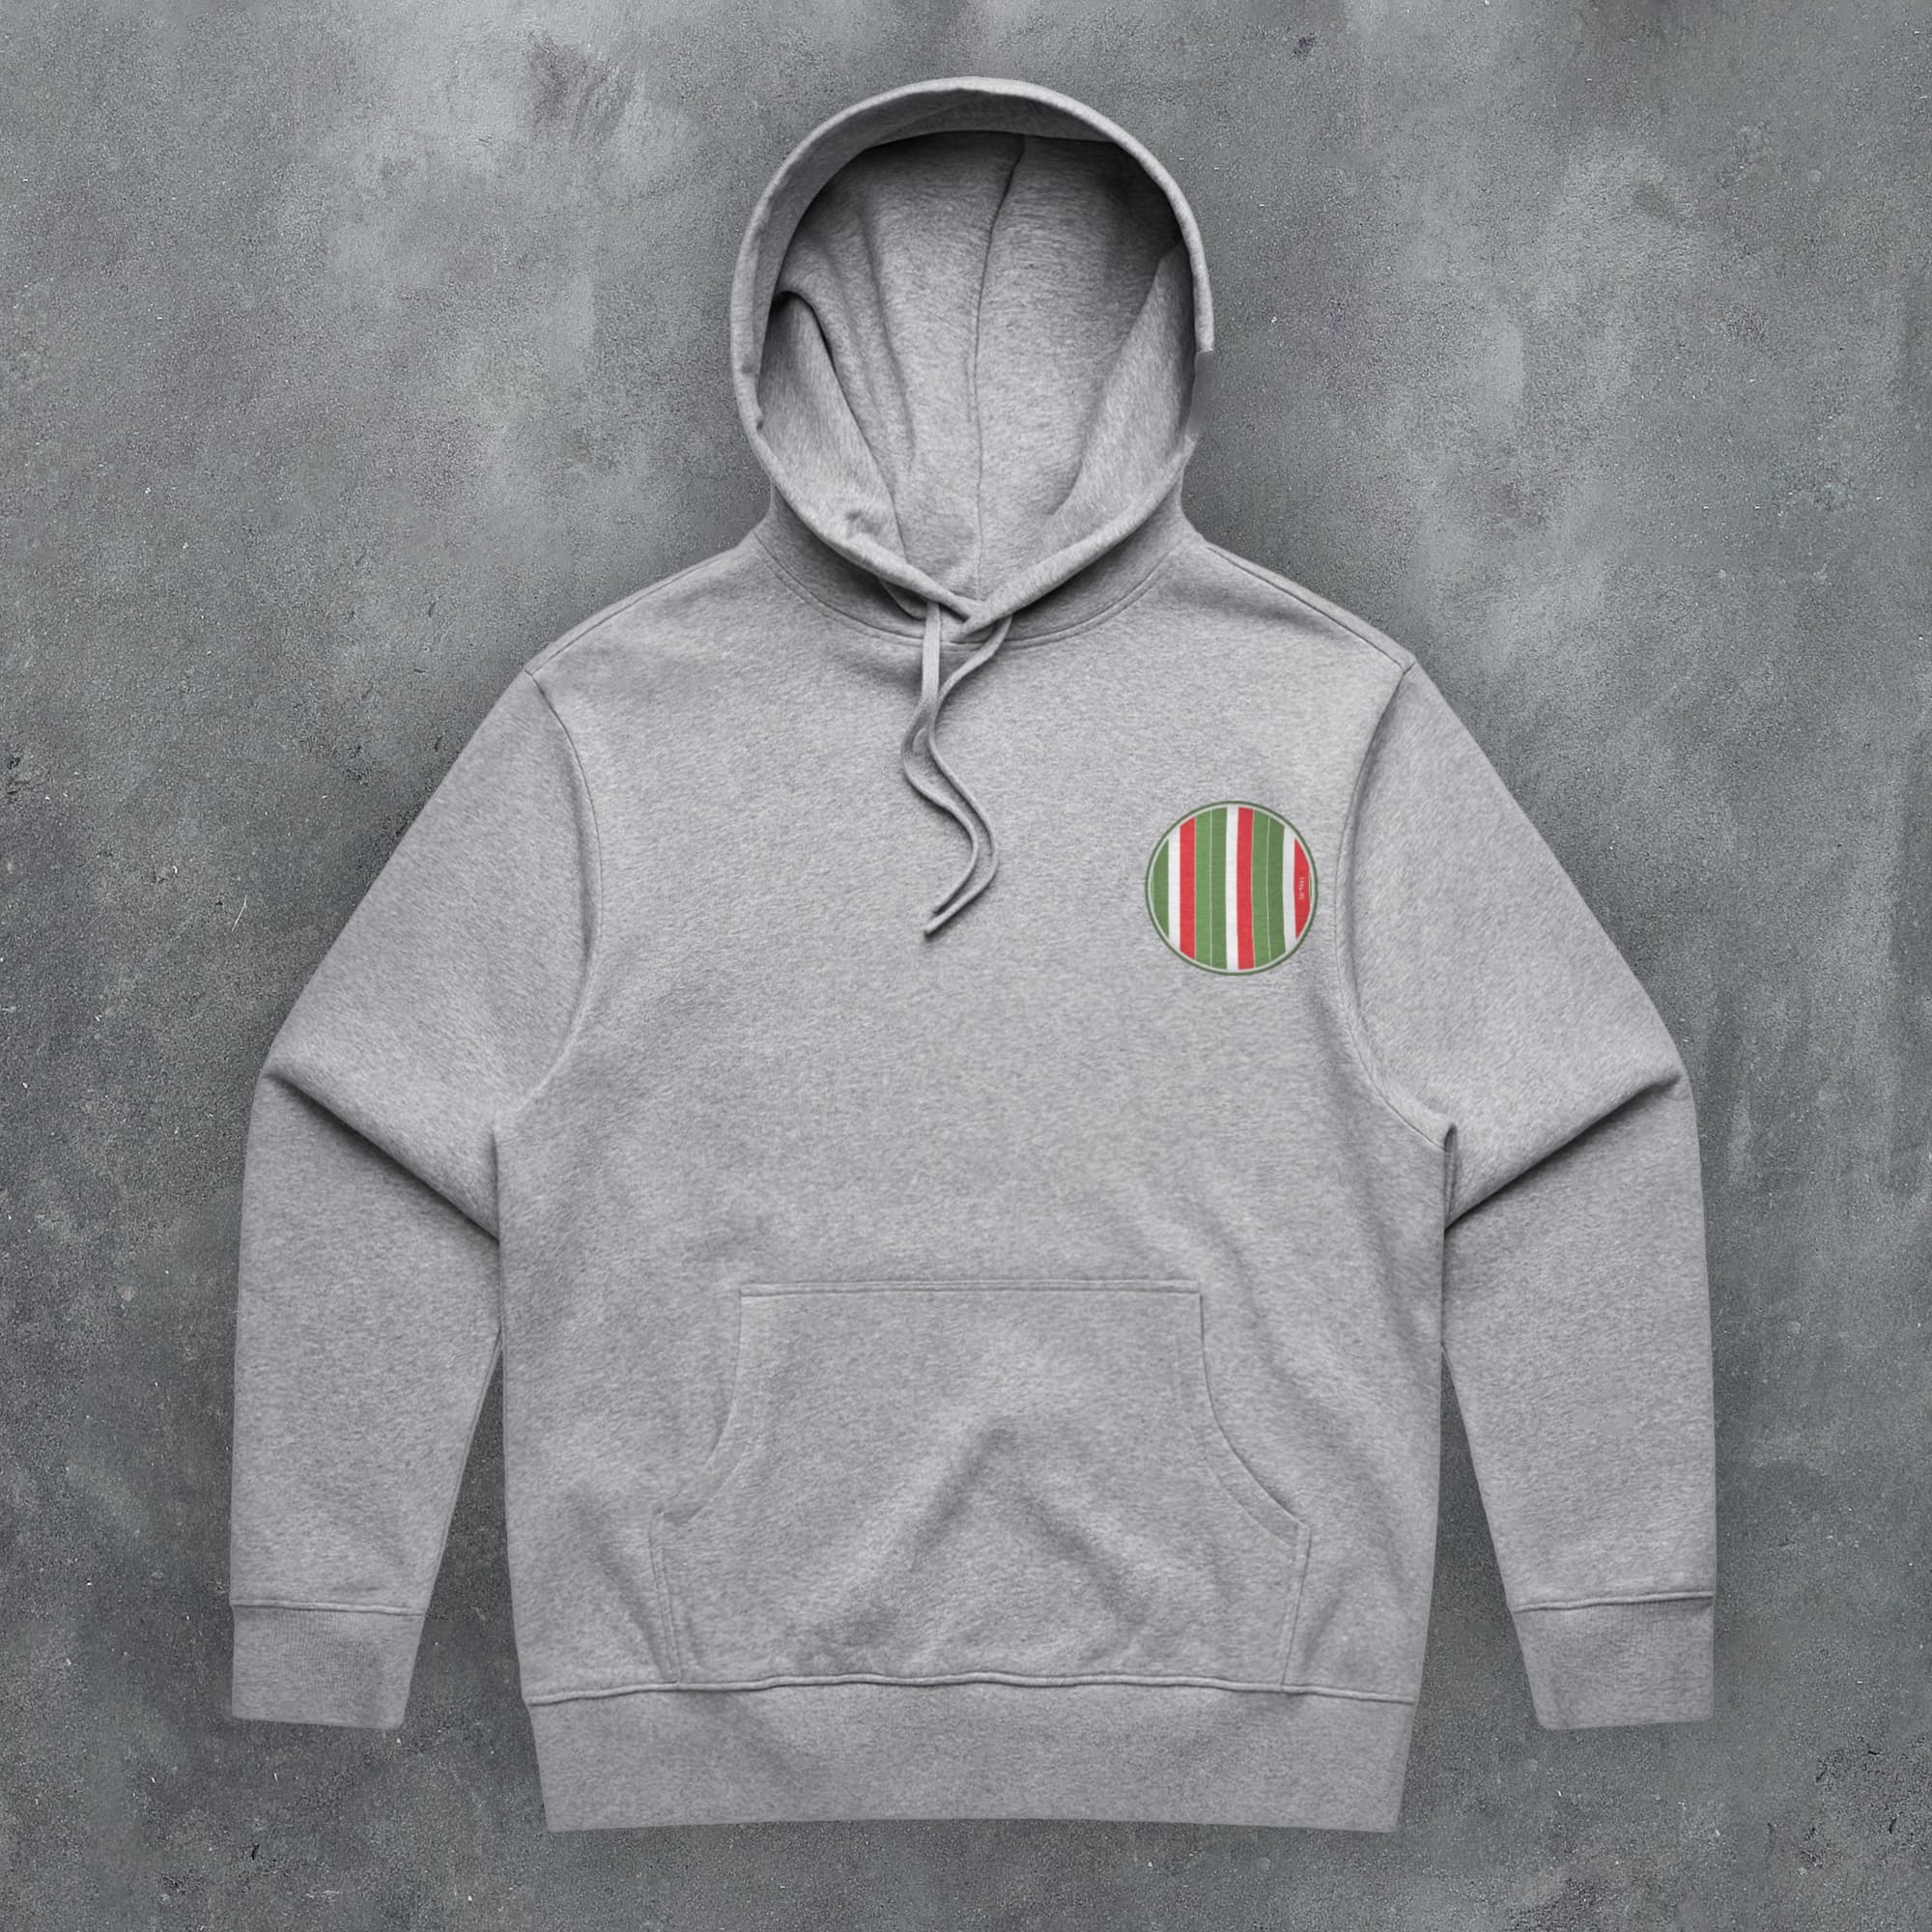 a grey hoodie with a red, white, and green stripe on the chest